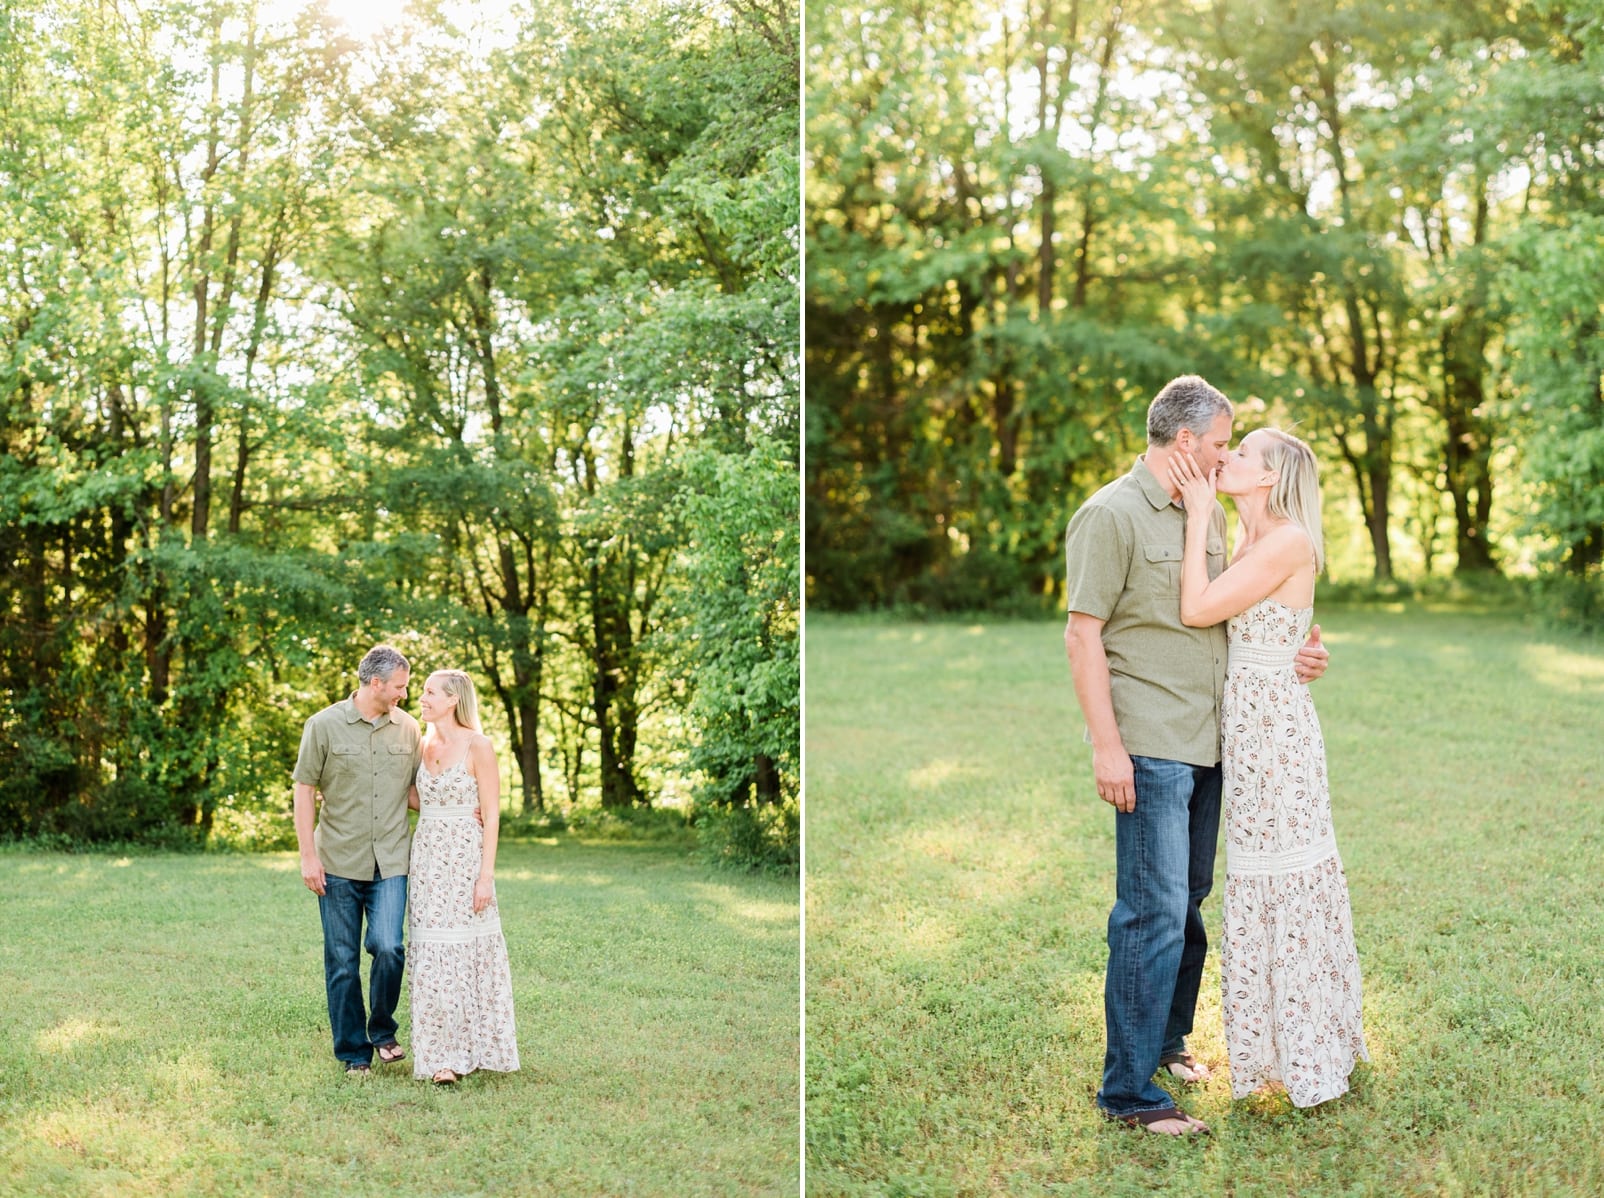 Wake Forest couple embracing in a wooded grass field photo